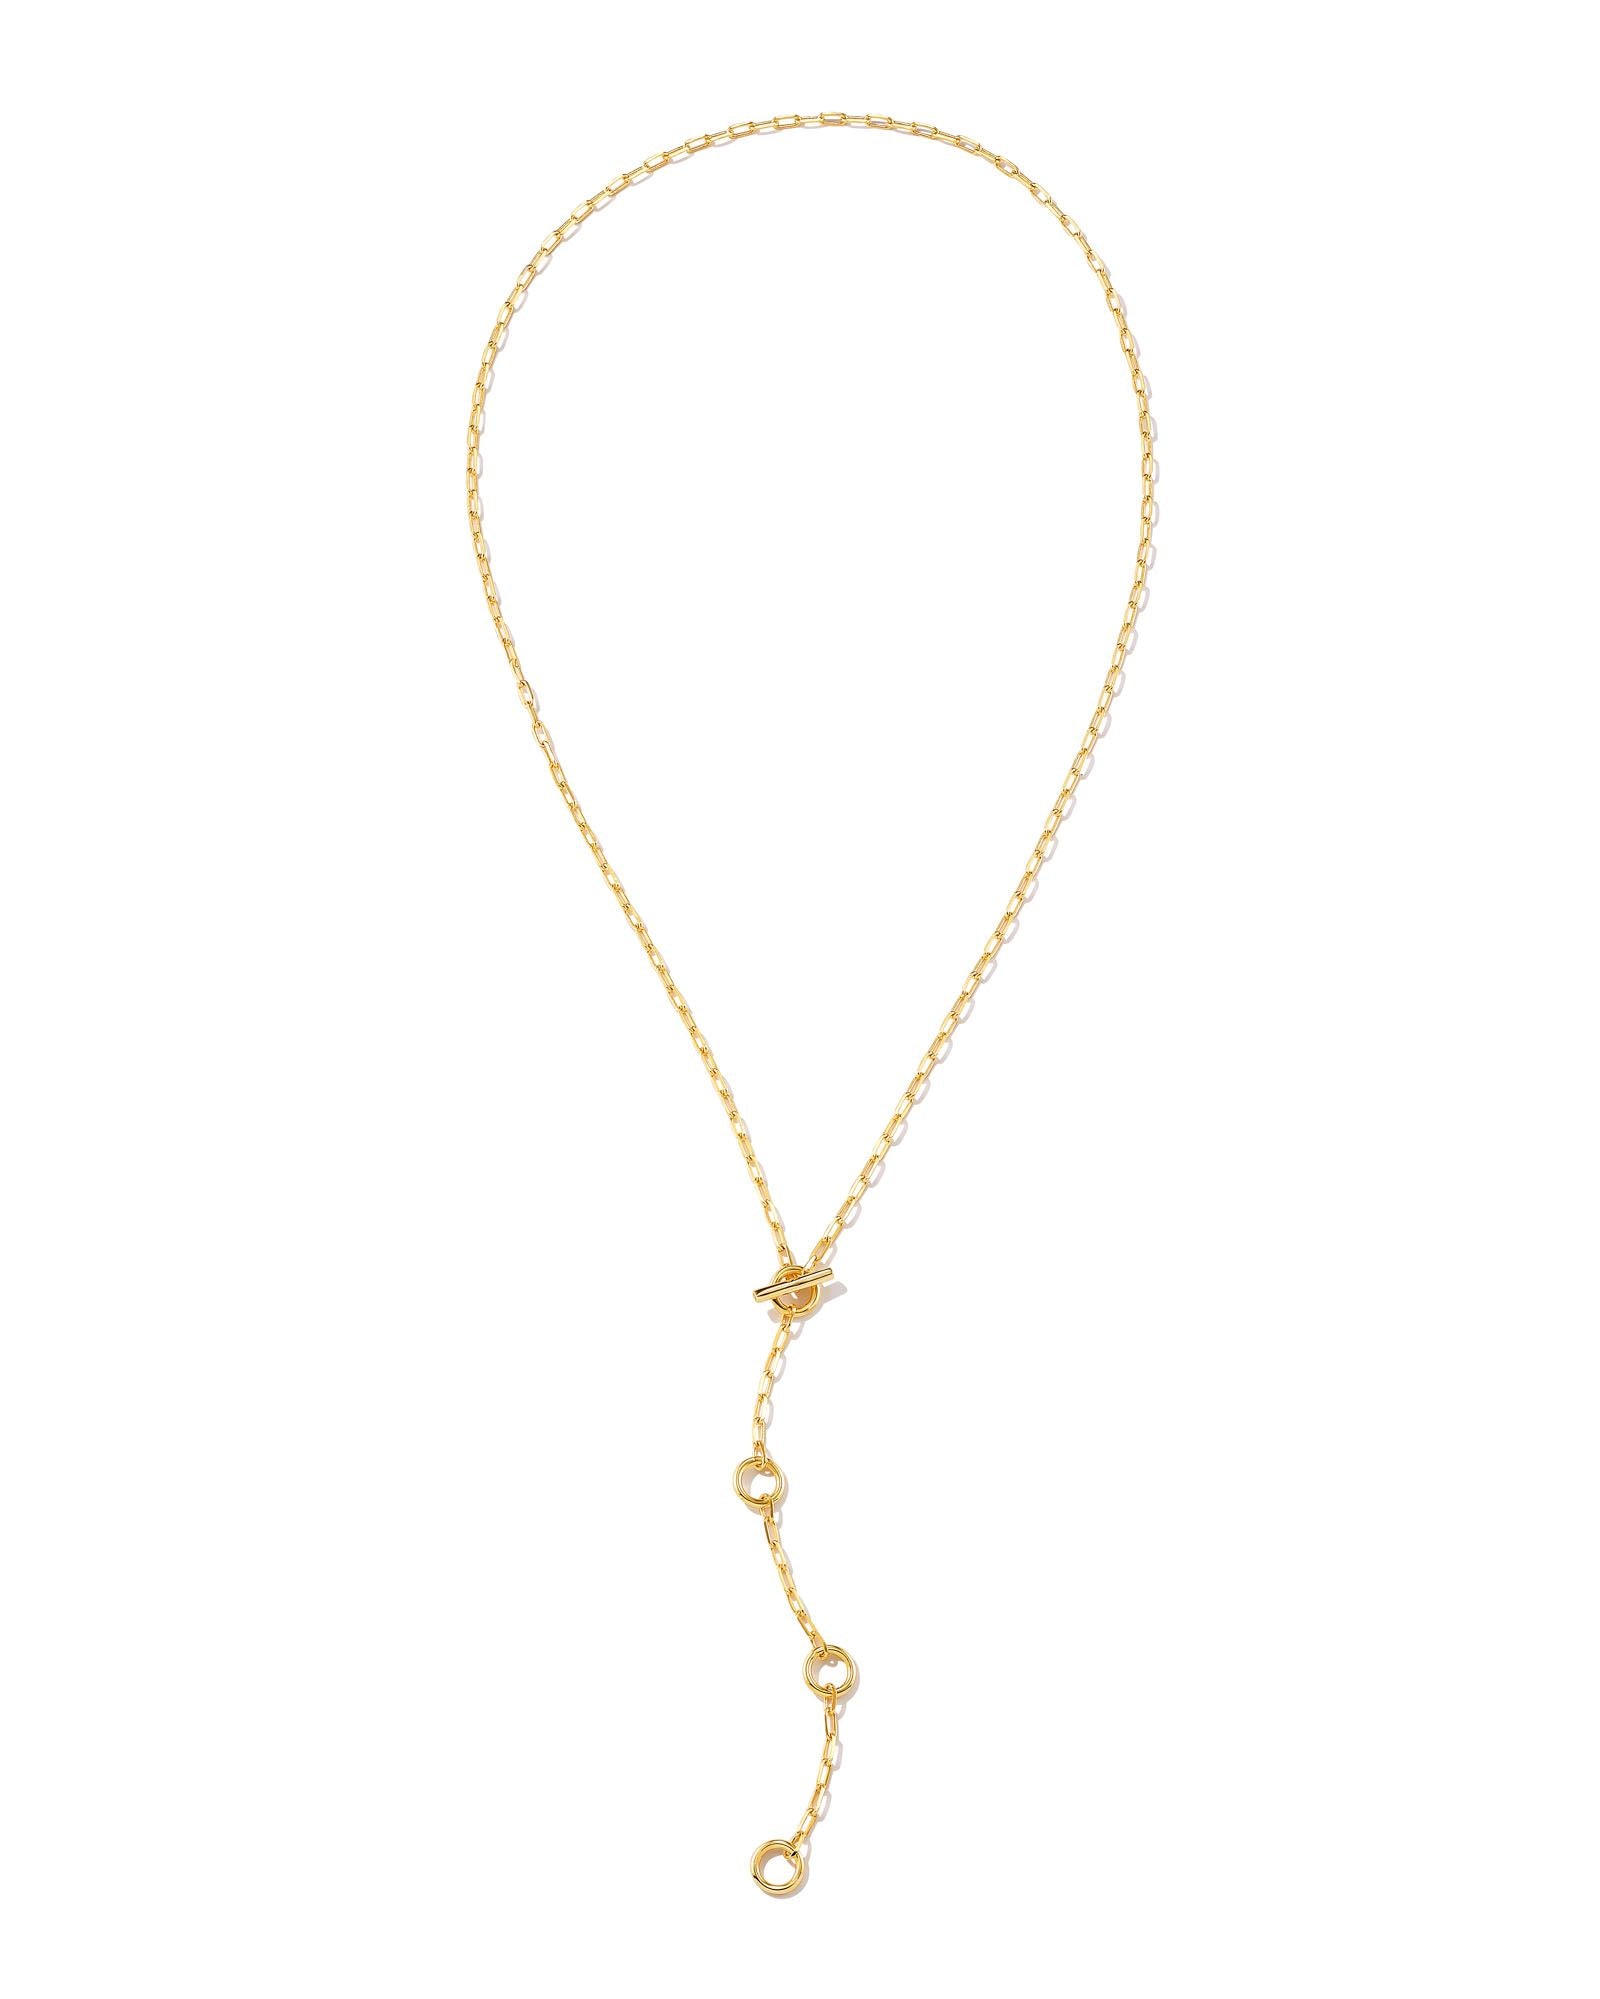 Andi Y Necklace in Gold